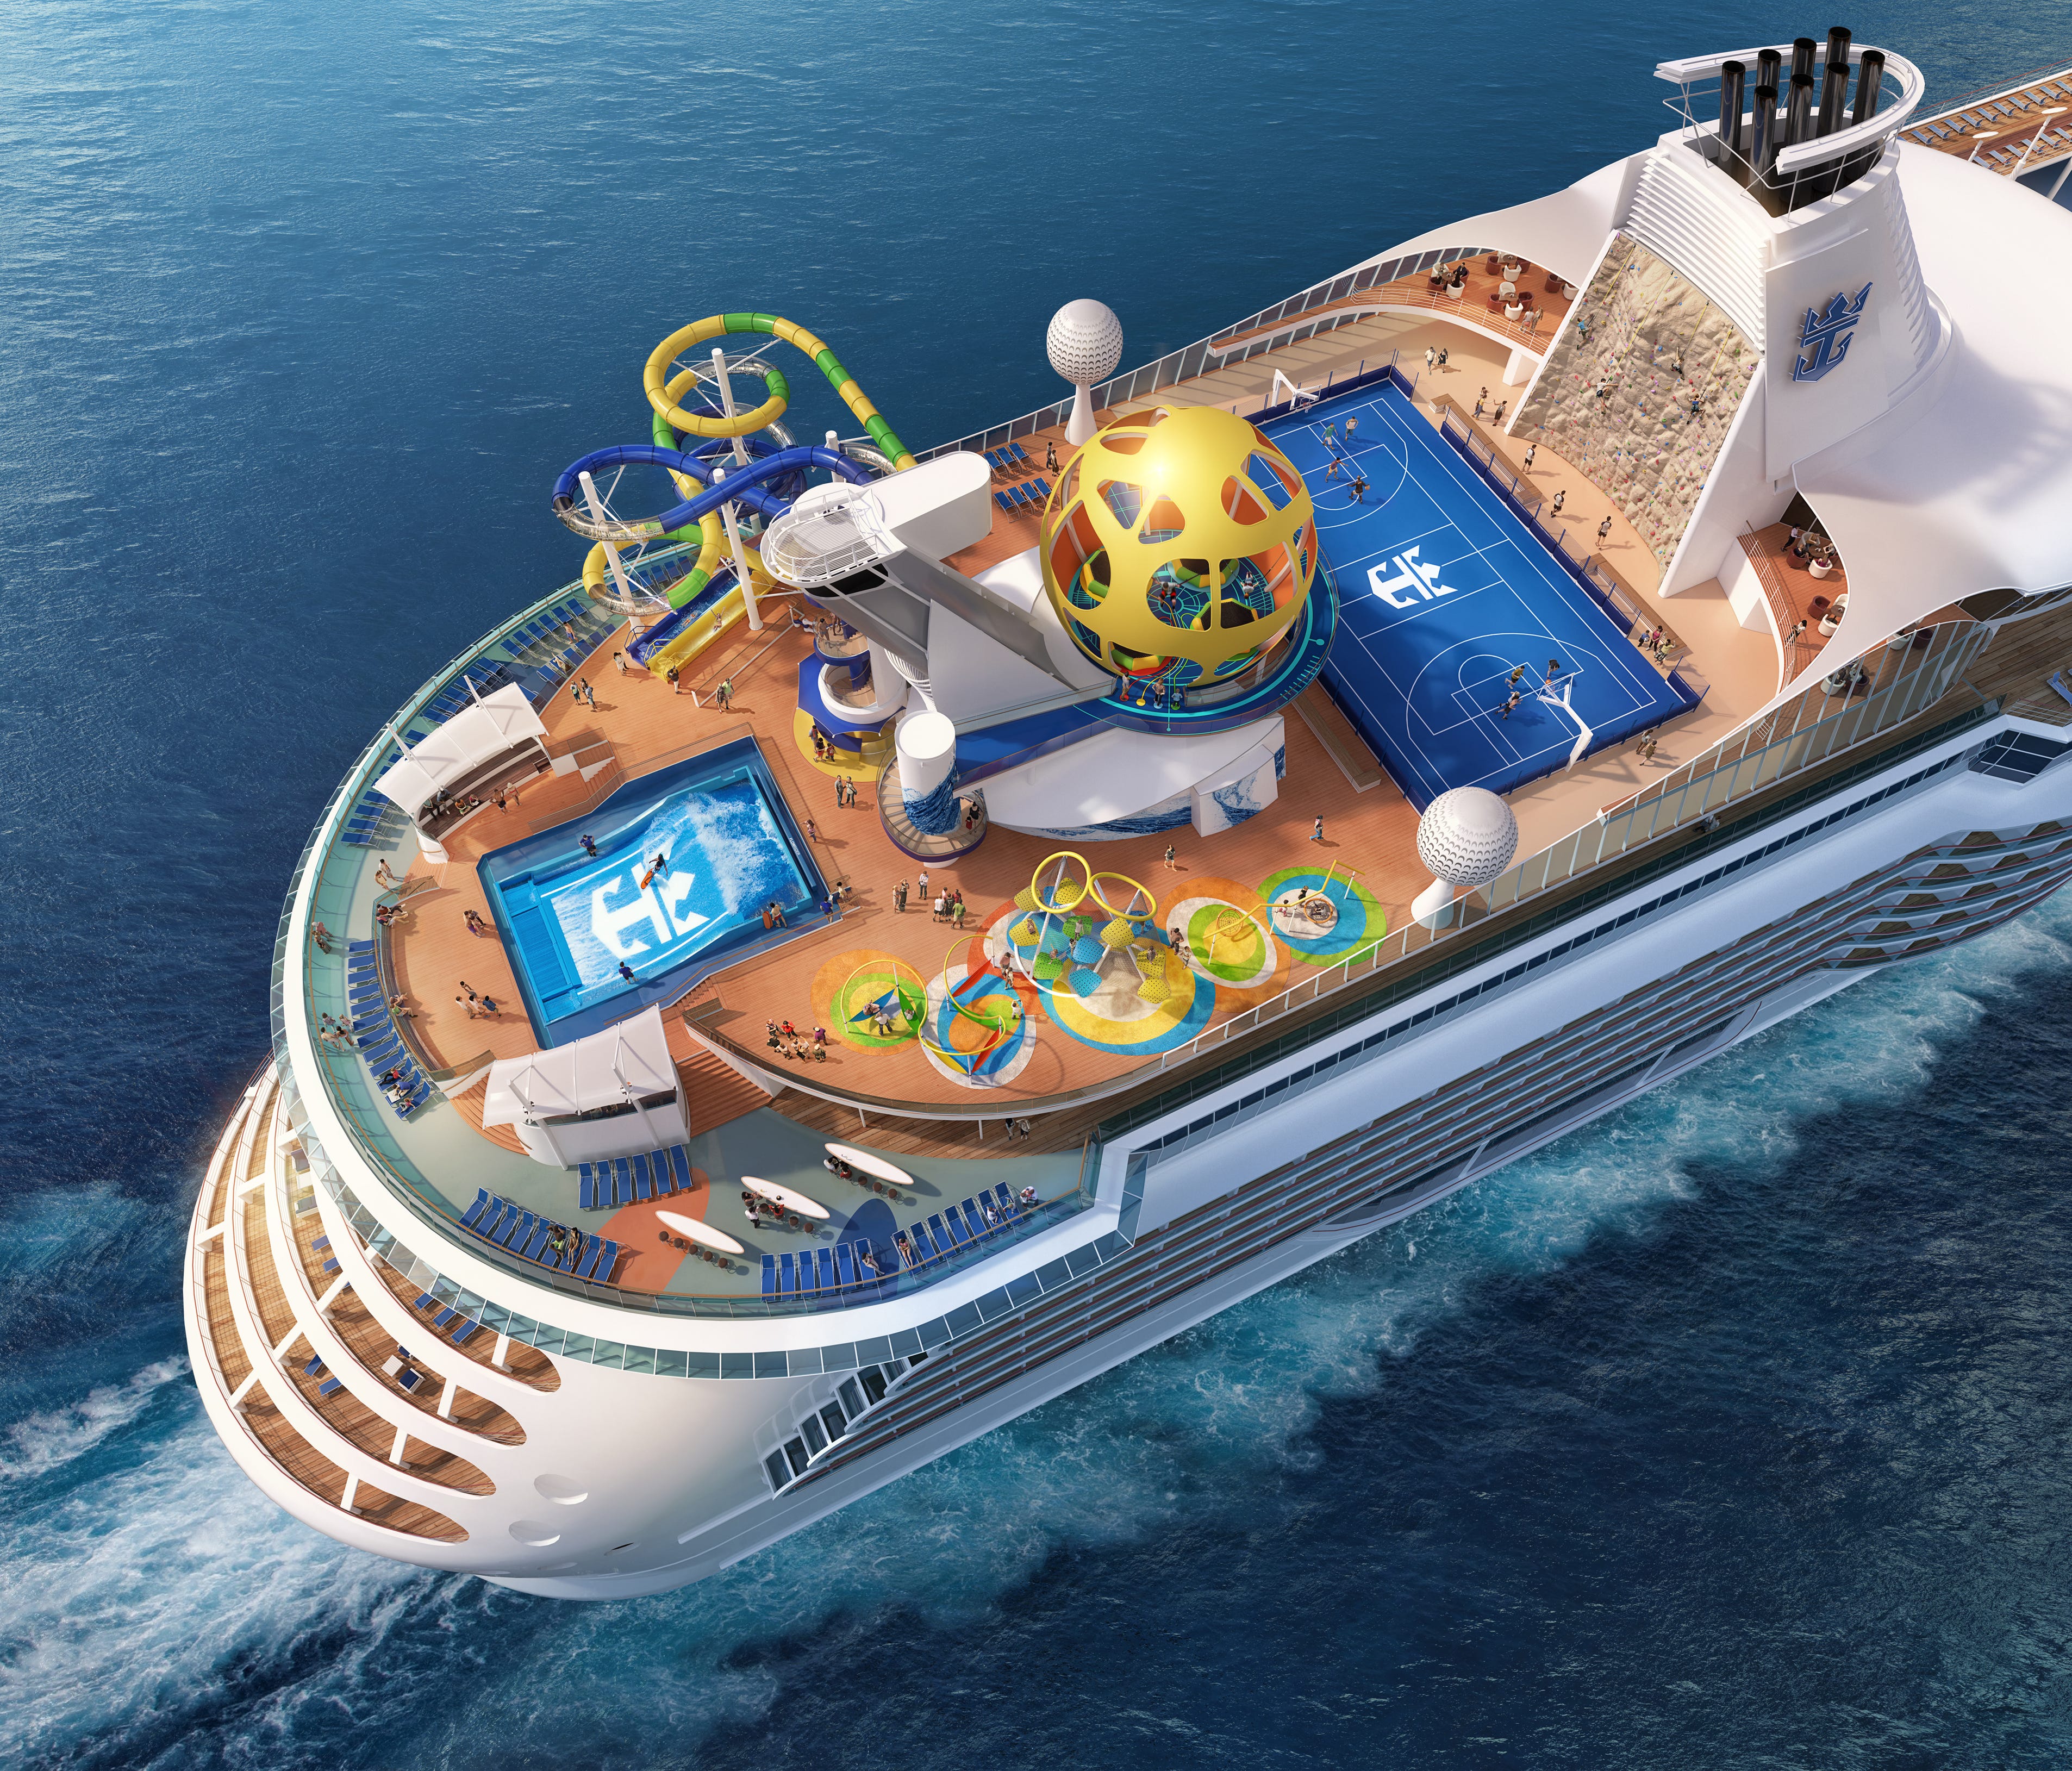 Royal Caribbean plans a significant makeover of the 3,114-passenger Mariner of the Seas in early 2018 that will include the addition of major new fun zones on its top deck.